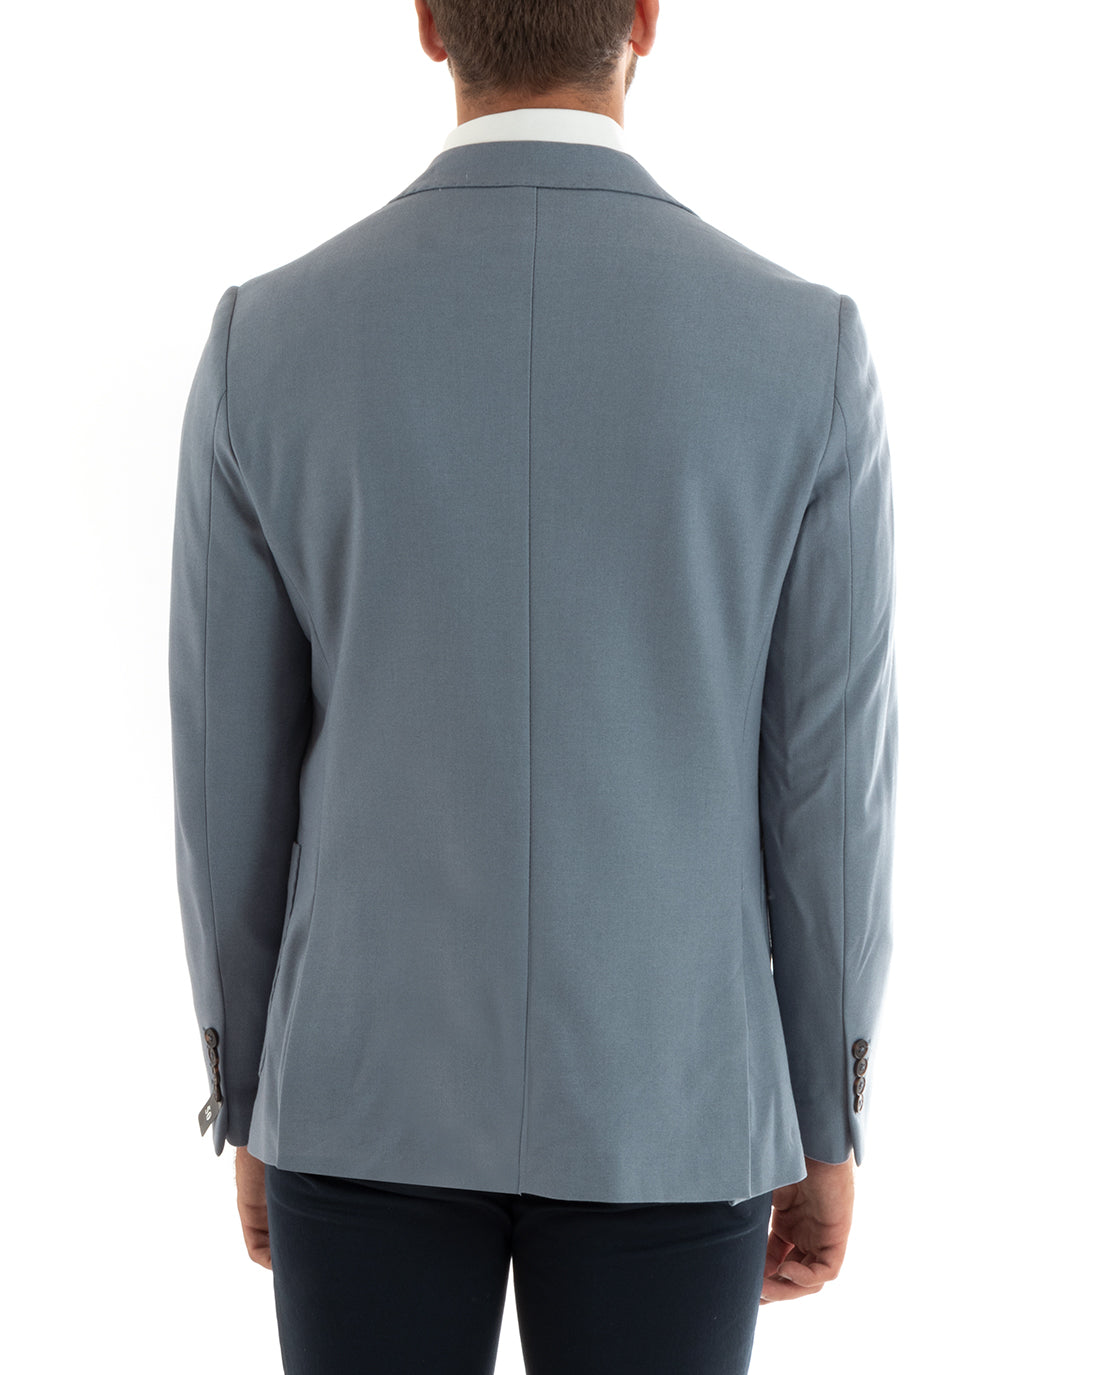 Men's Blazer Basic Single-breasted Classic Lapel Stitched Solid Color Powder Casual GIOSAL-G3087A